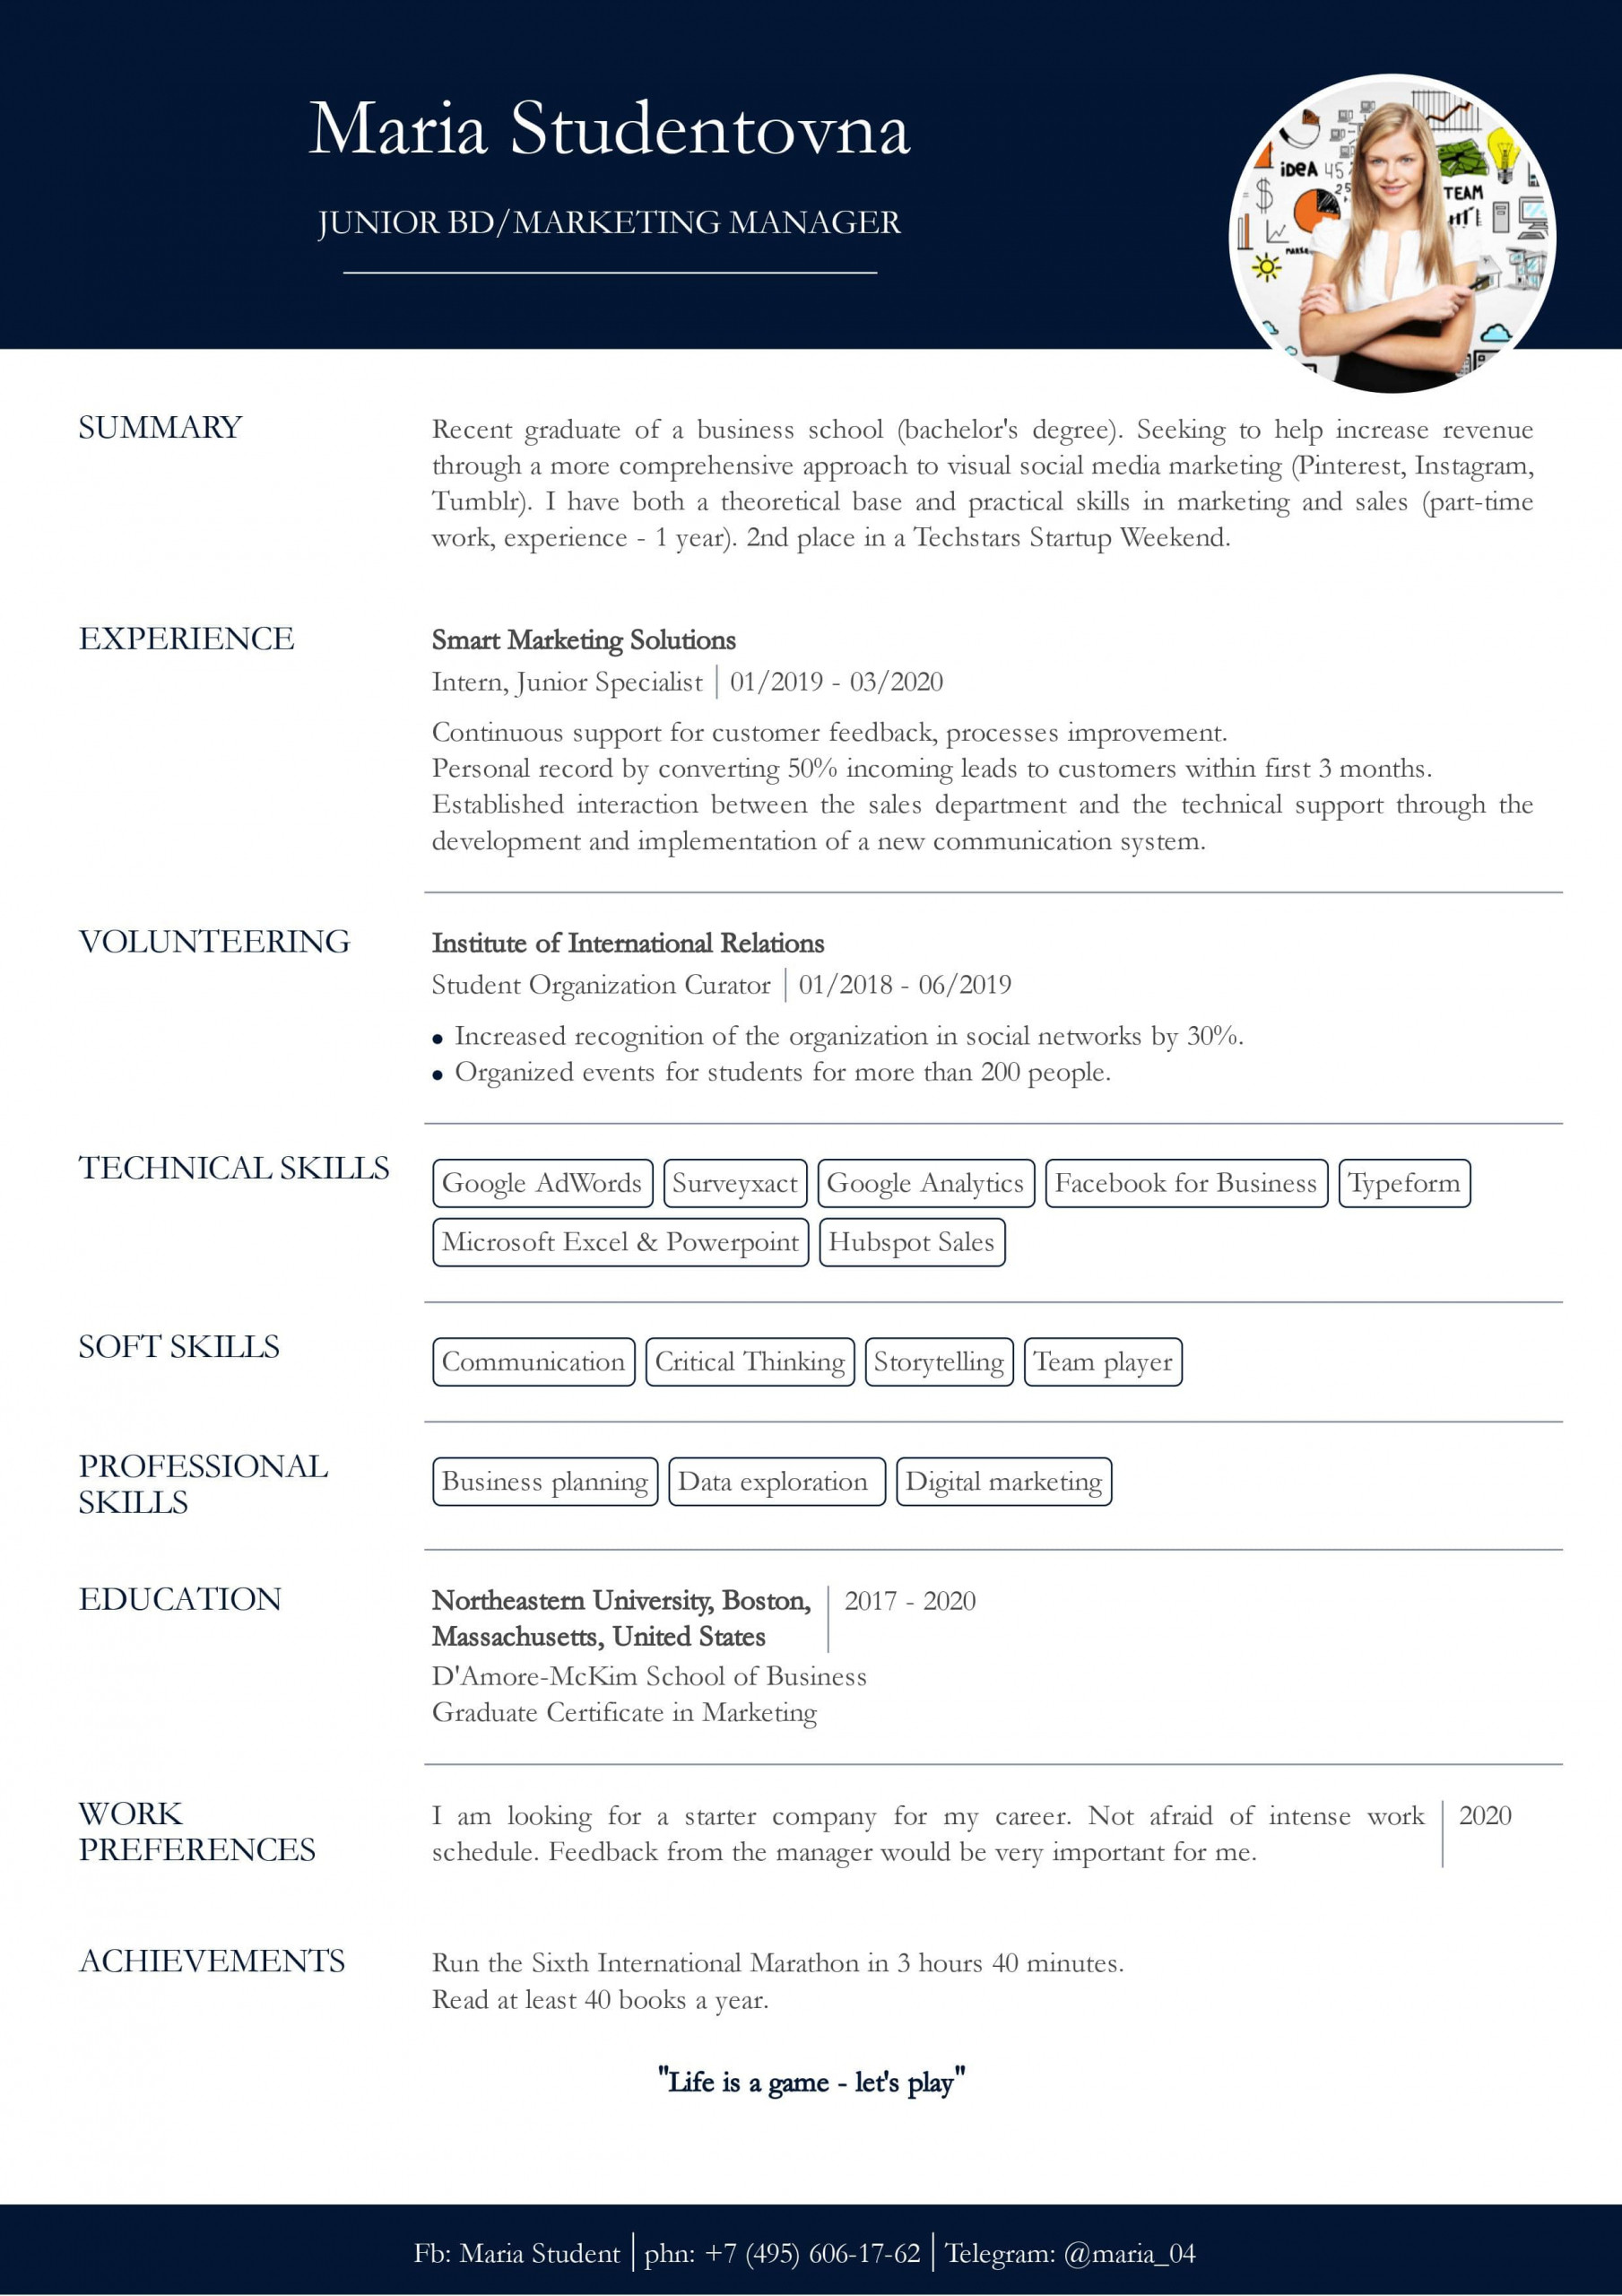 Beginners Resume with No Experience Template Resume with No Work Experience. Sample for Students. – Cv2you Blog